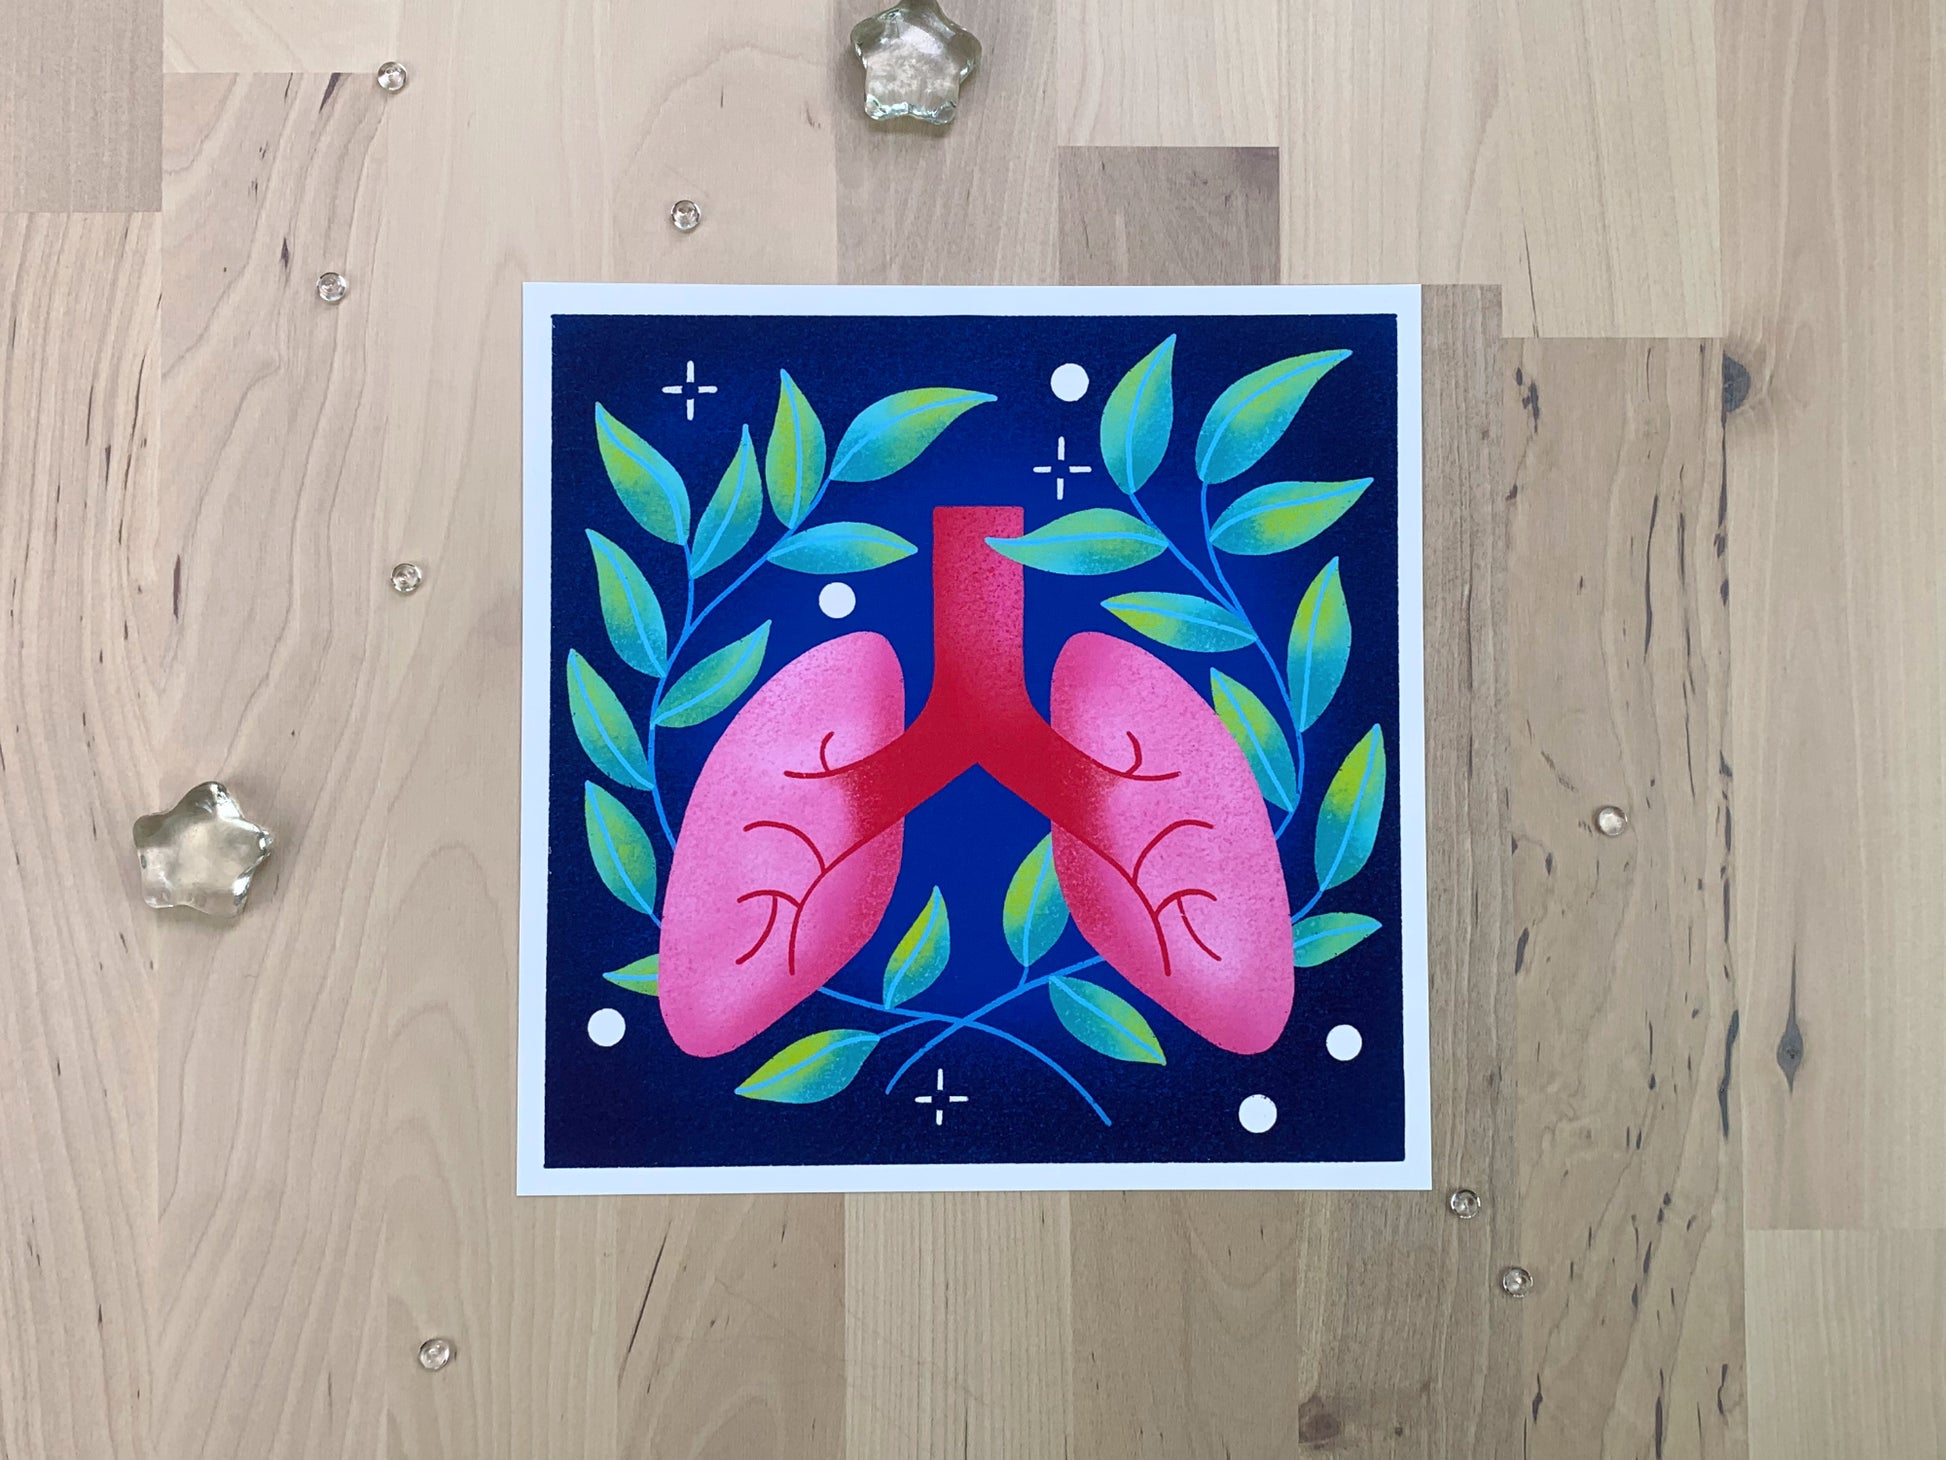 An illustration of a pair of lungs in front of some green leaves.